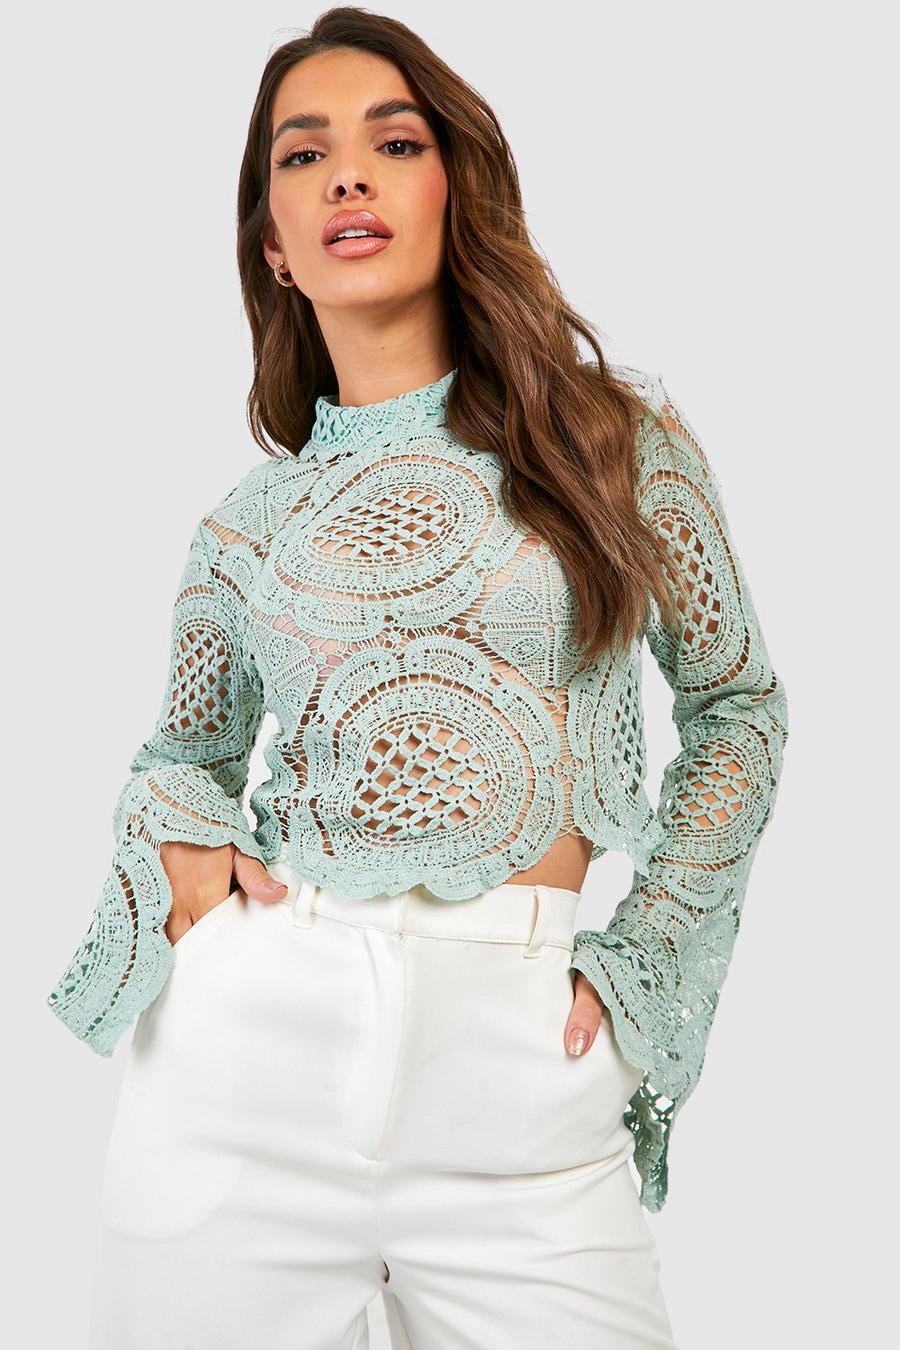 SoTeer Lace Crop Top for Women Round Neck Lace Kuwait